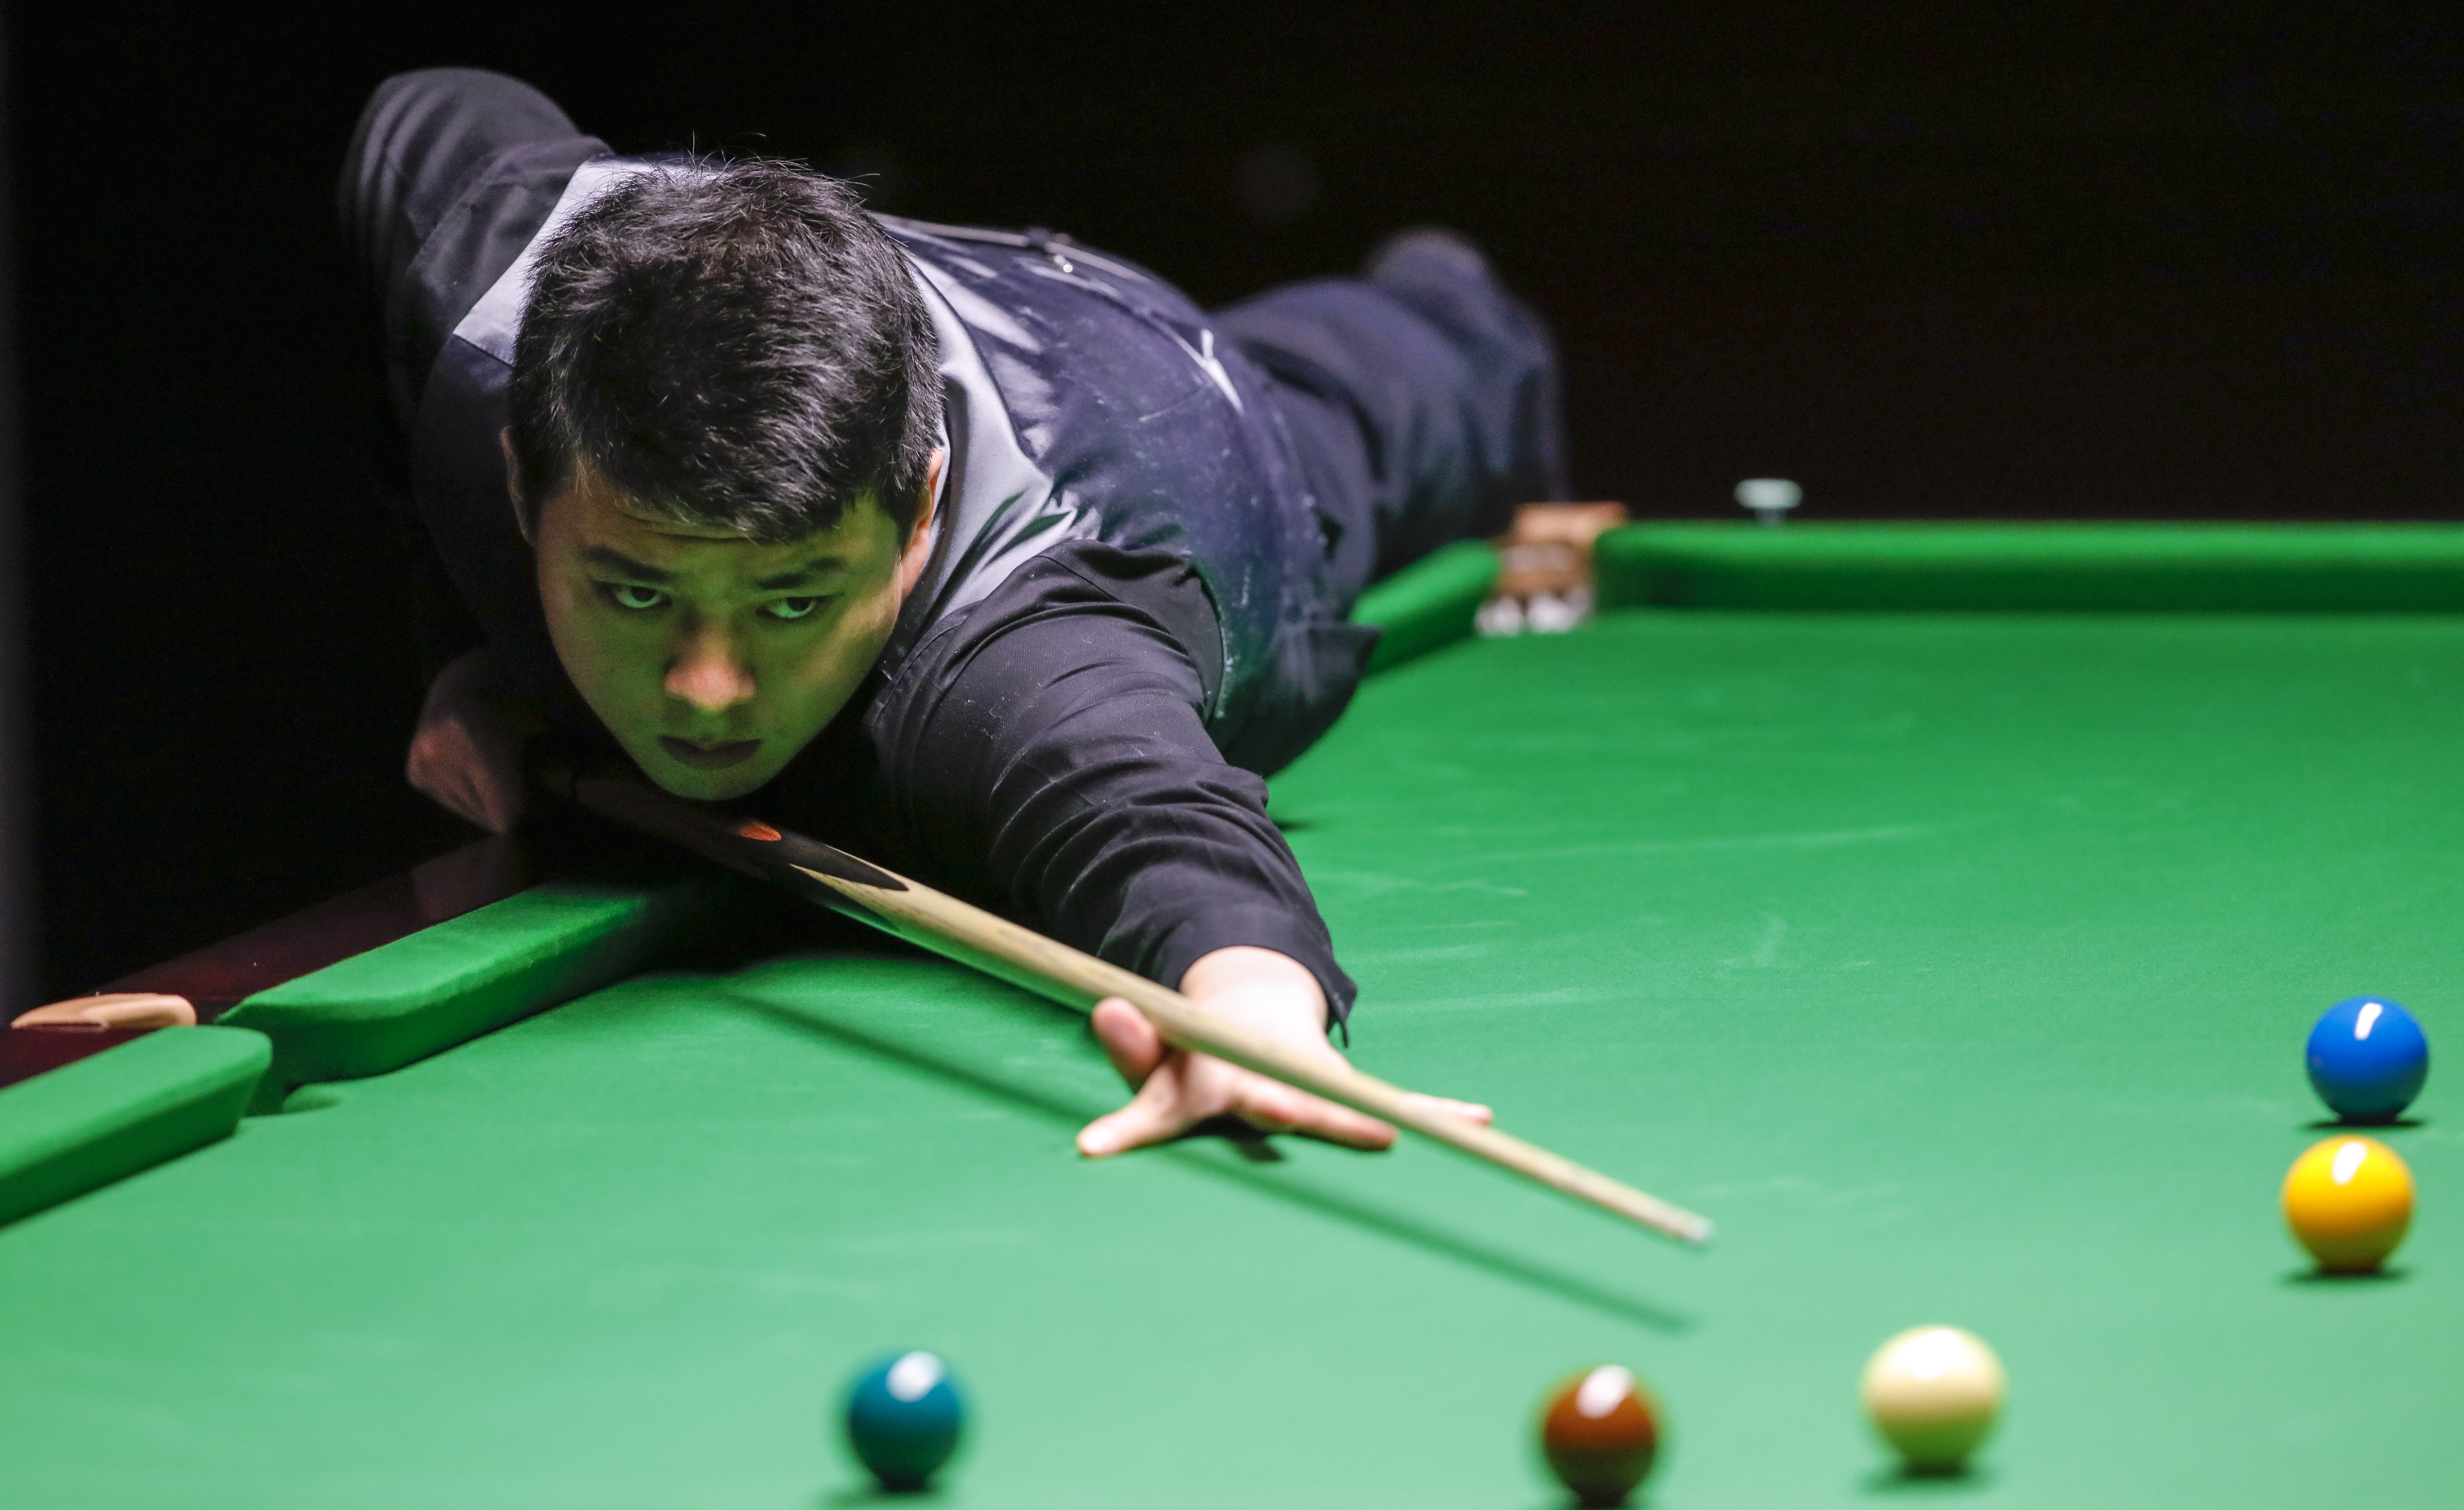 Three Chinese players lose in third round at Snooker World Championship qualifiers